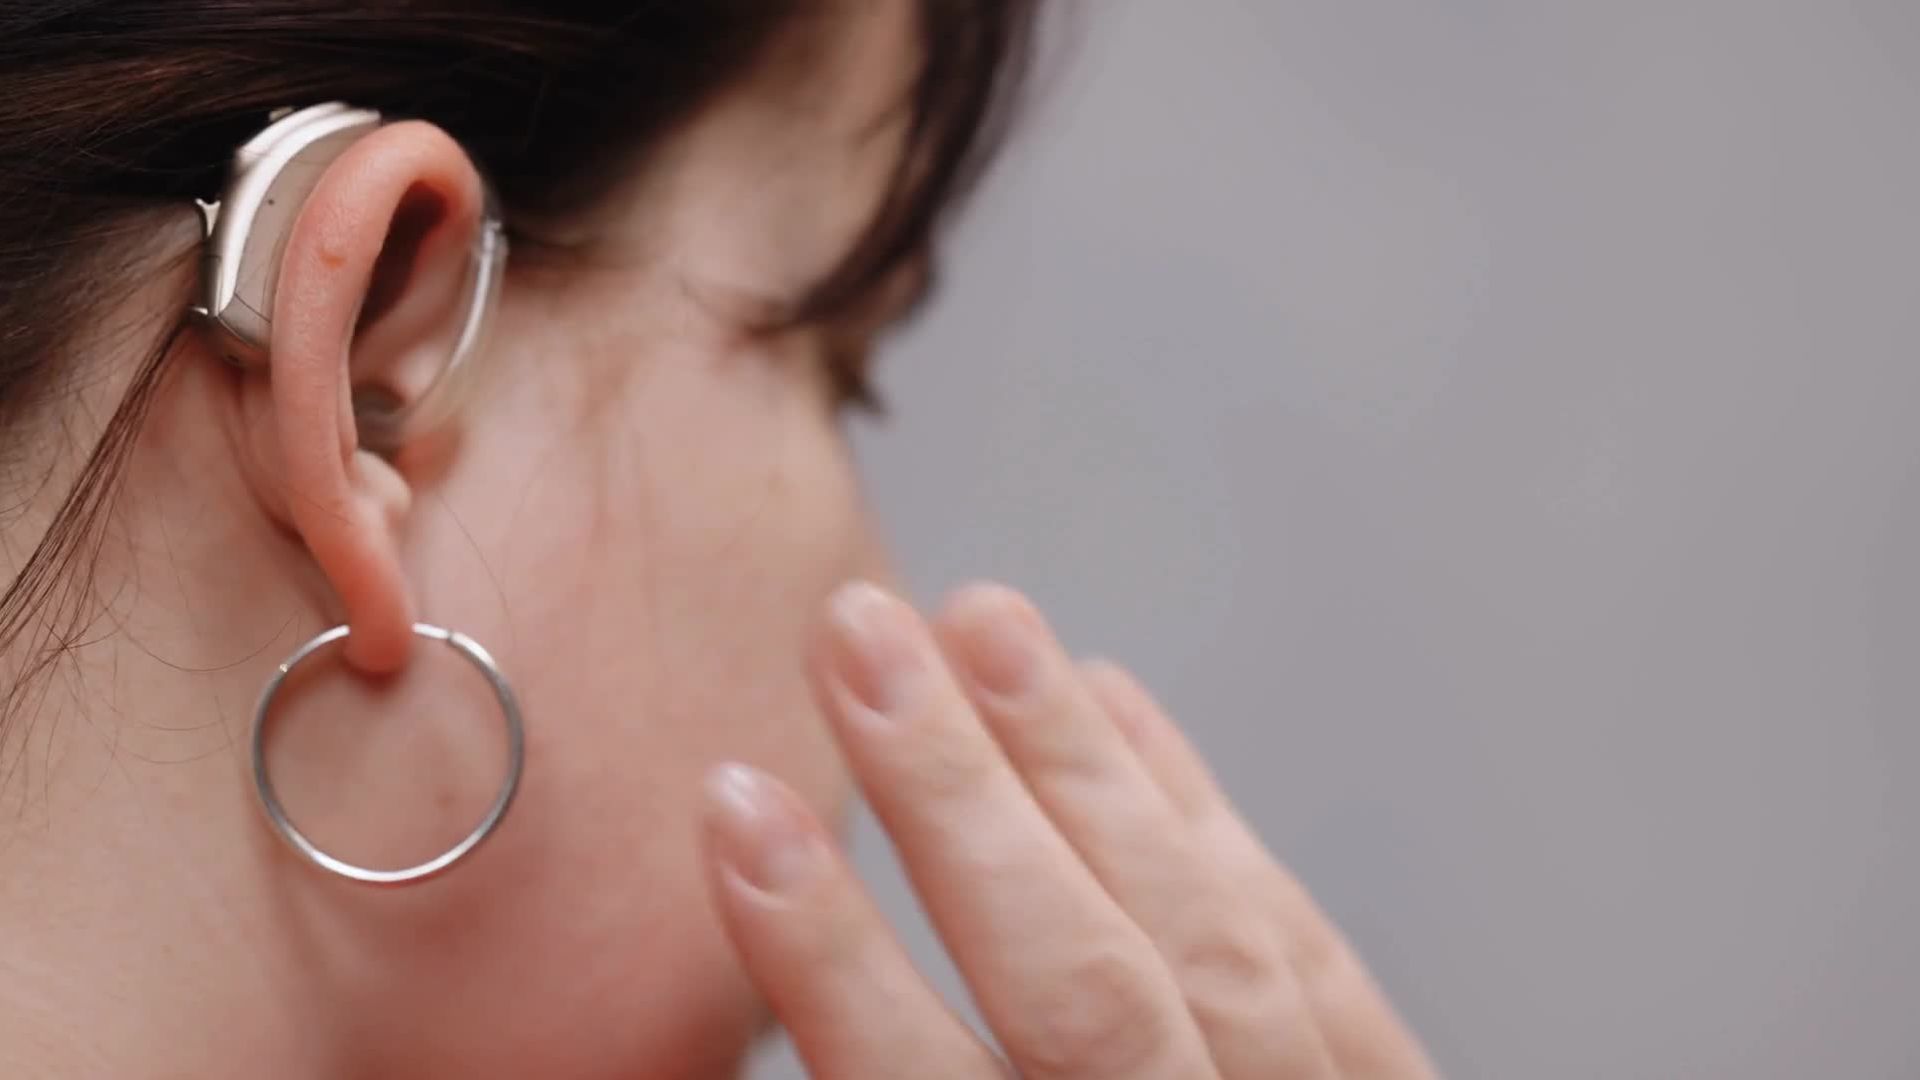 How Long Does It Take to Get Used to Wearing Hearing Aids?